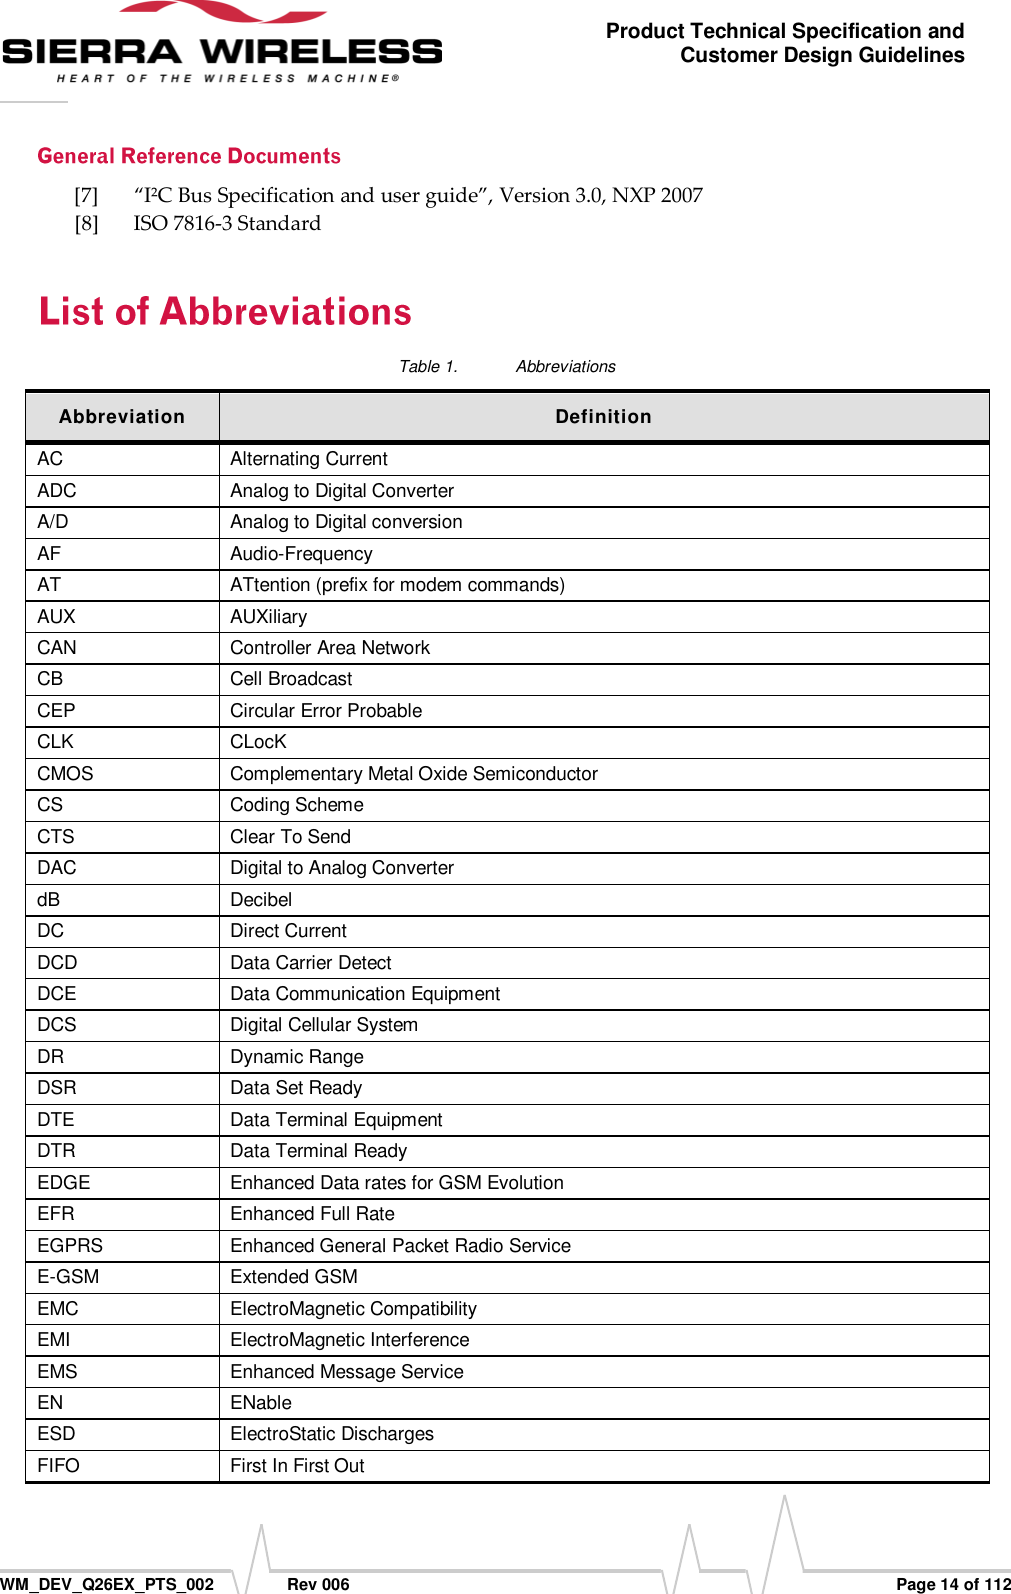      WM_DEV_Q26EX_PTS_002  Rev 006  Page 14 of 112 Product Technical Specification and Customer Design Guidelines [7] “I²C Bus Specification and user guide”, Version 3.0, NXP 2007  [8] ISO 7816-3 Standard Table 1.  Abbreviations Abbreviation Definition AC Alternating Current ADC Analog to Digital Converter A/D Analog to Digital conversion AF Audio-Frequency AT ATtention (prefix for modem commands) AUX AUXiliary CAN Controller Area Network CB Cell Broadcast CEP Circular Error Probable CLK CLocK CMOS Complementary Metal Oxide Semiconductor CS Coding Scheme CTS Clear To Send DAC Digital to Analog Converter dB Decibel DC Direct Current DCD Data Carrier Detect DCE Data Communication Equipment DCS Digital Cellular System DR Dynamic Range DSR Data Set Ready DTE Data Terminal Equipment DTR Data Terminal Ready EDGE Enhanced Data rates for GSM Evolution EFR Enhanced Full Rate EGPRS Enhanced General Packet Radio Service E-GSM Extended GSM EMC ElectroMagnetic Compatibility EMI ElectroMagnetic Interference EMS Enhanced Message Service EN ENable ESD ElectroStatic Discharges FIFO First In First Out 